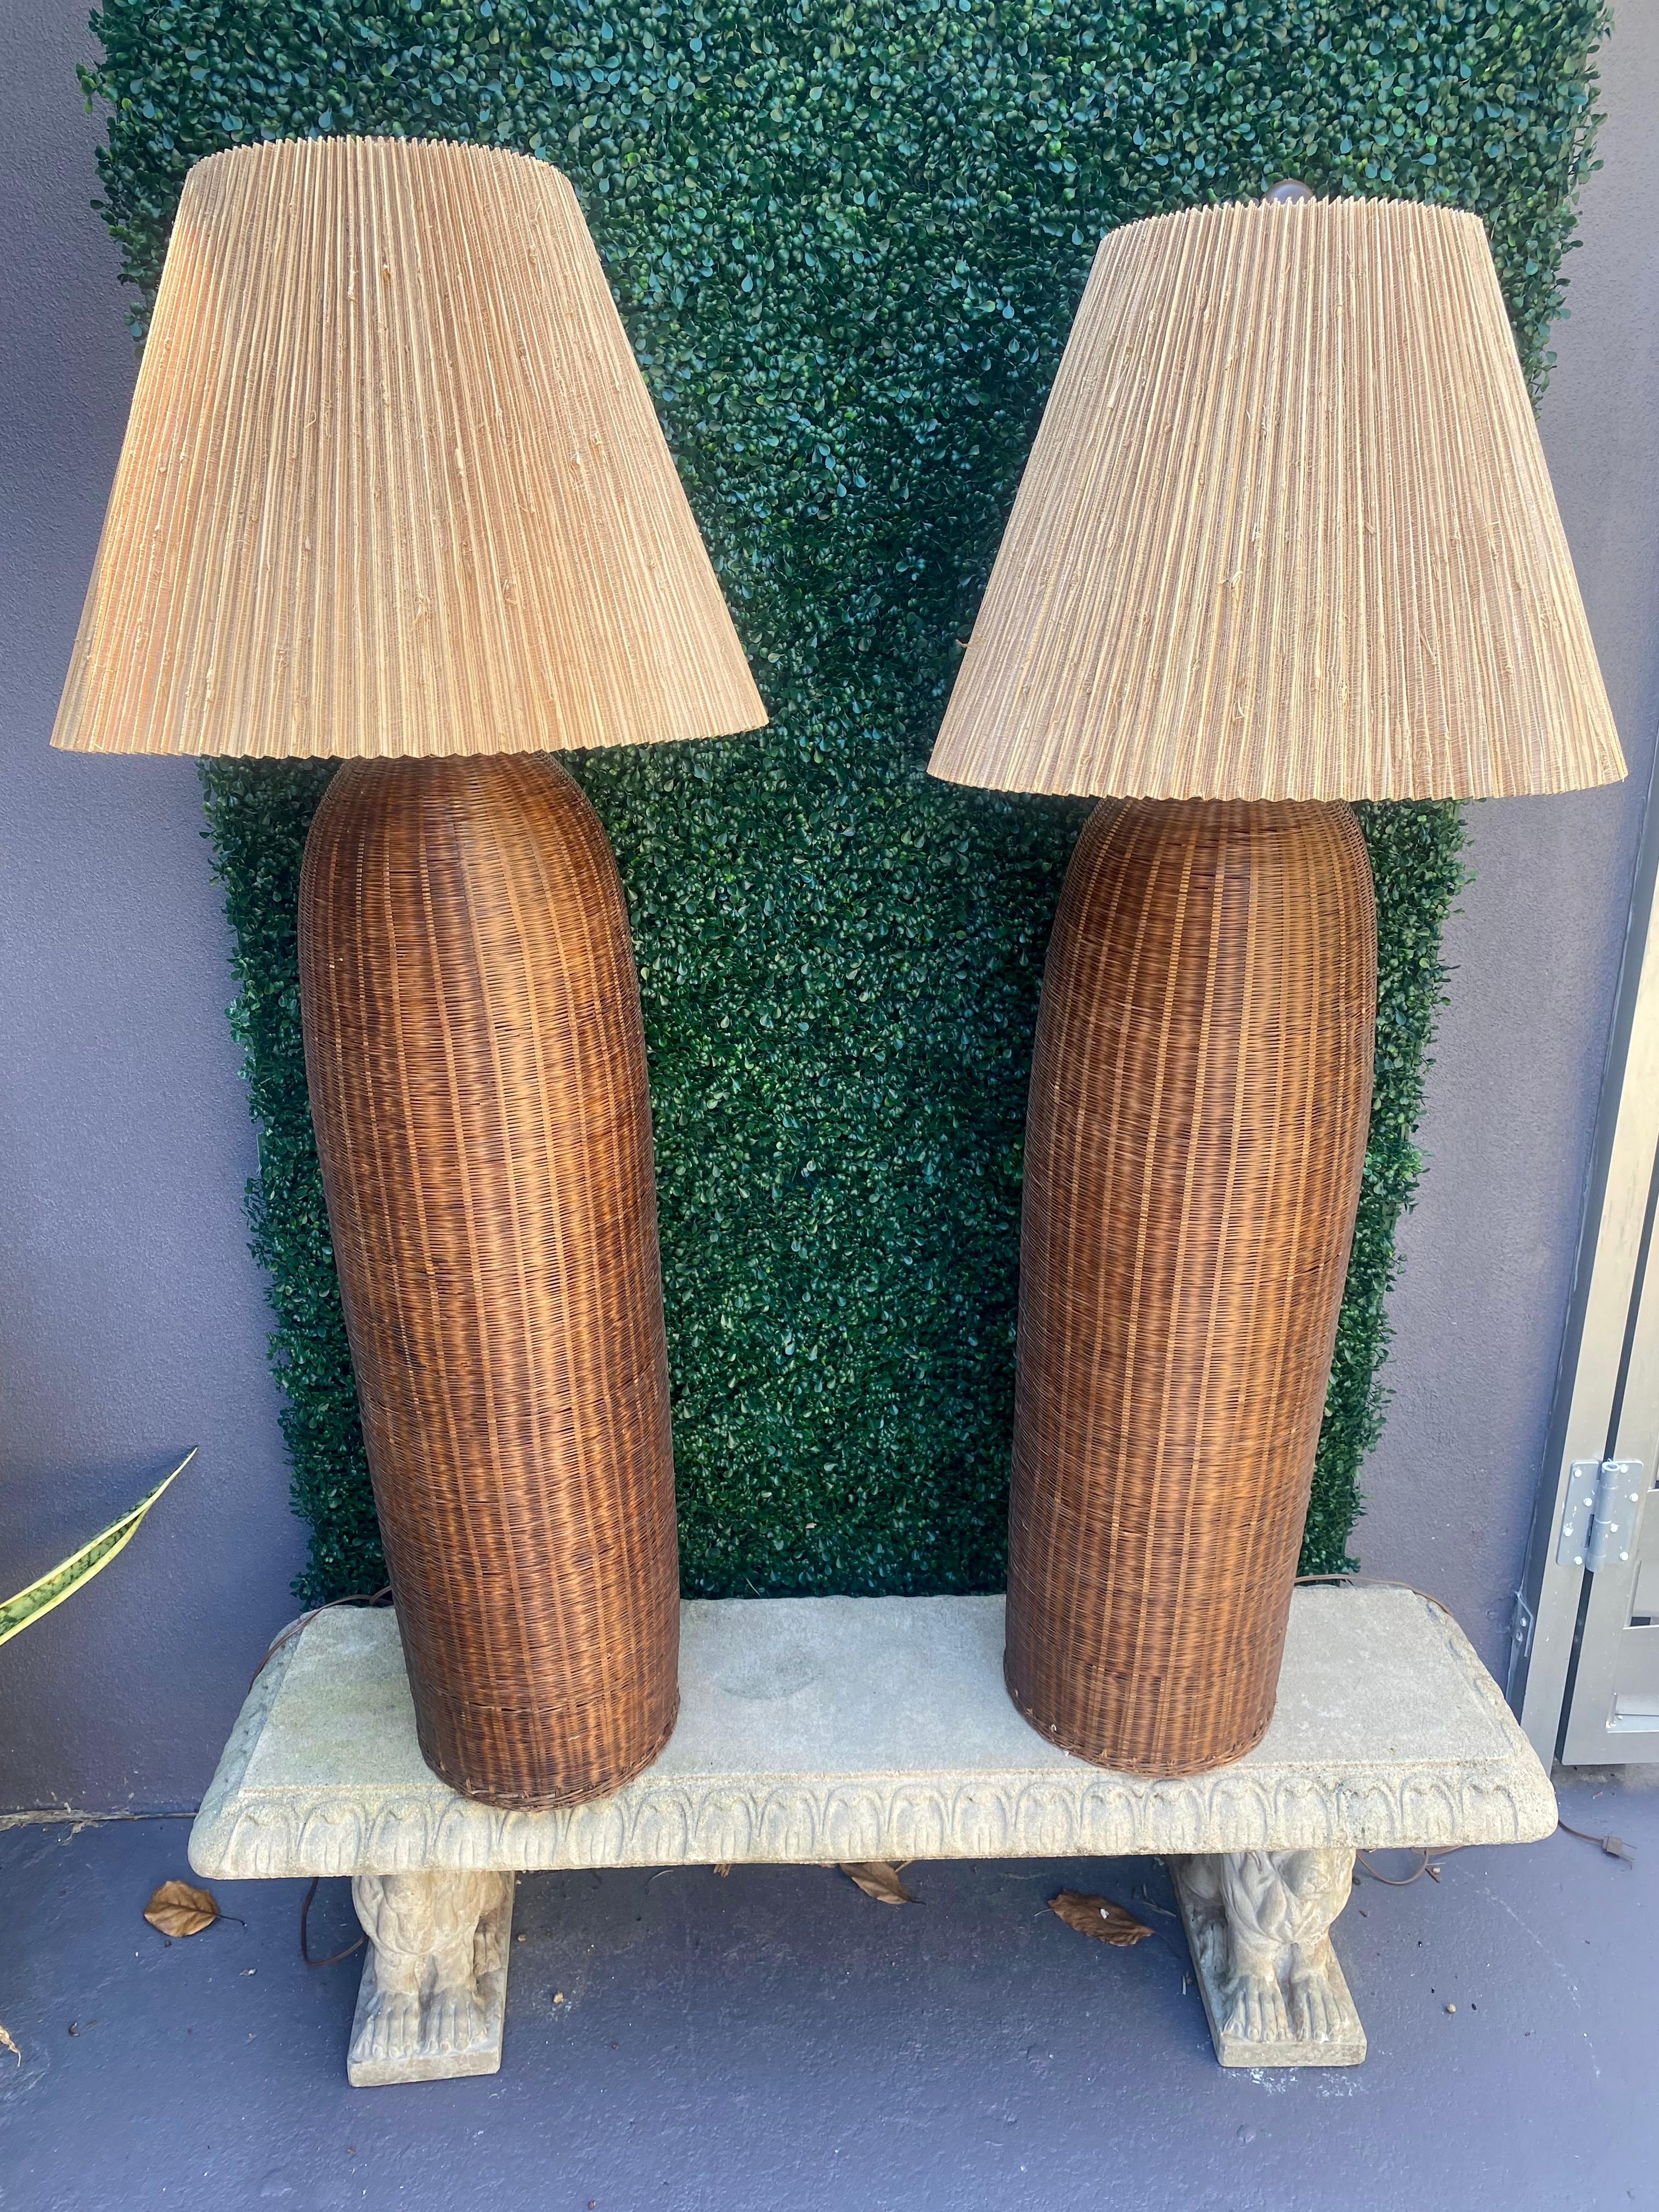 On offer on this occasion is one of the most stunning and rare, Organic thin wicker weave, rattan floor lamps you could hope to find. Structurally sound and very strong lamps. Outstanding design is exhibited throughout. The beautiful lamps are a